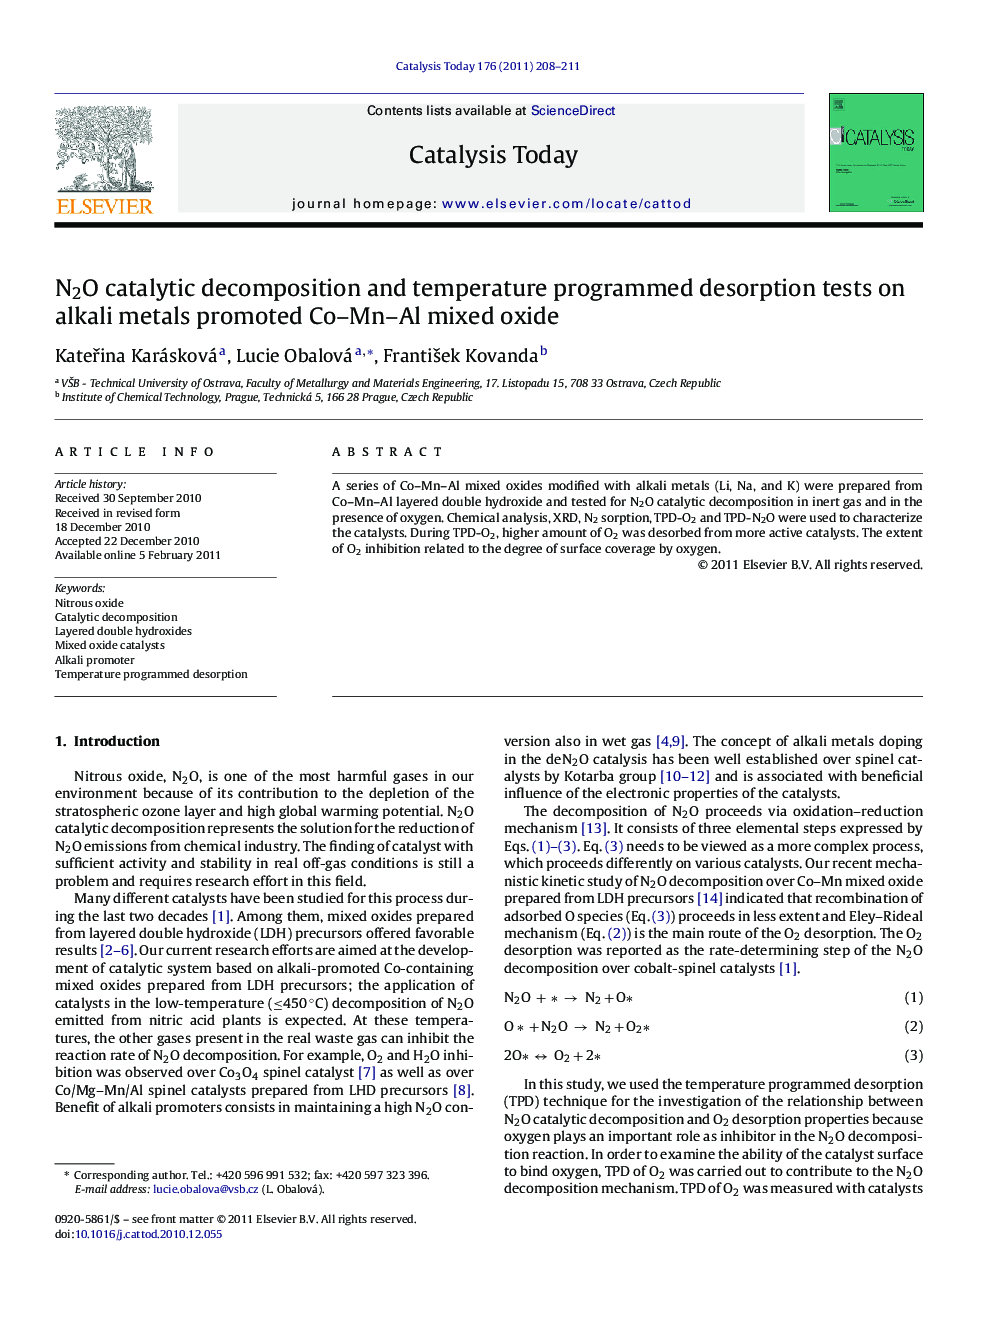 N2O catalytic decomposition and temperature programmed desorption tests on alkali metals promoted Co–Mn–Al mixed oxide